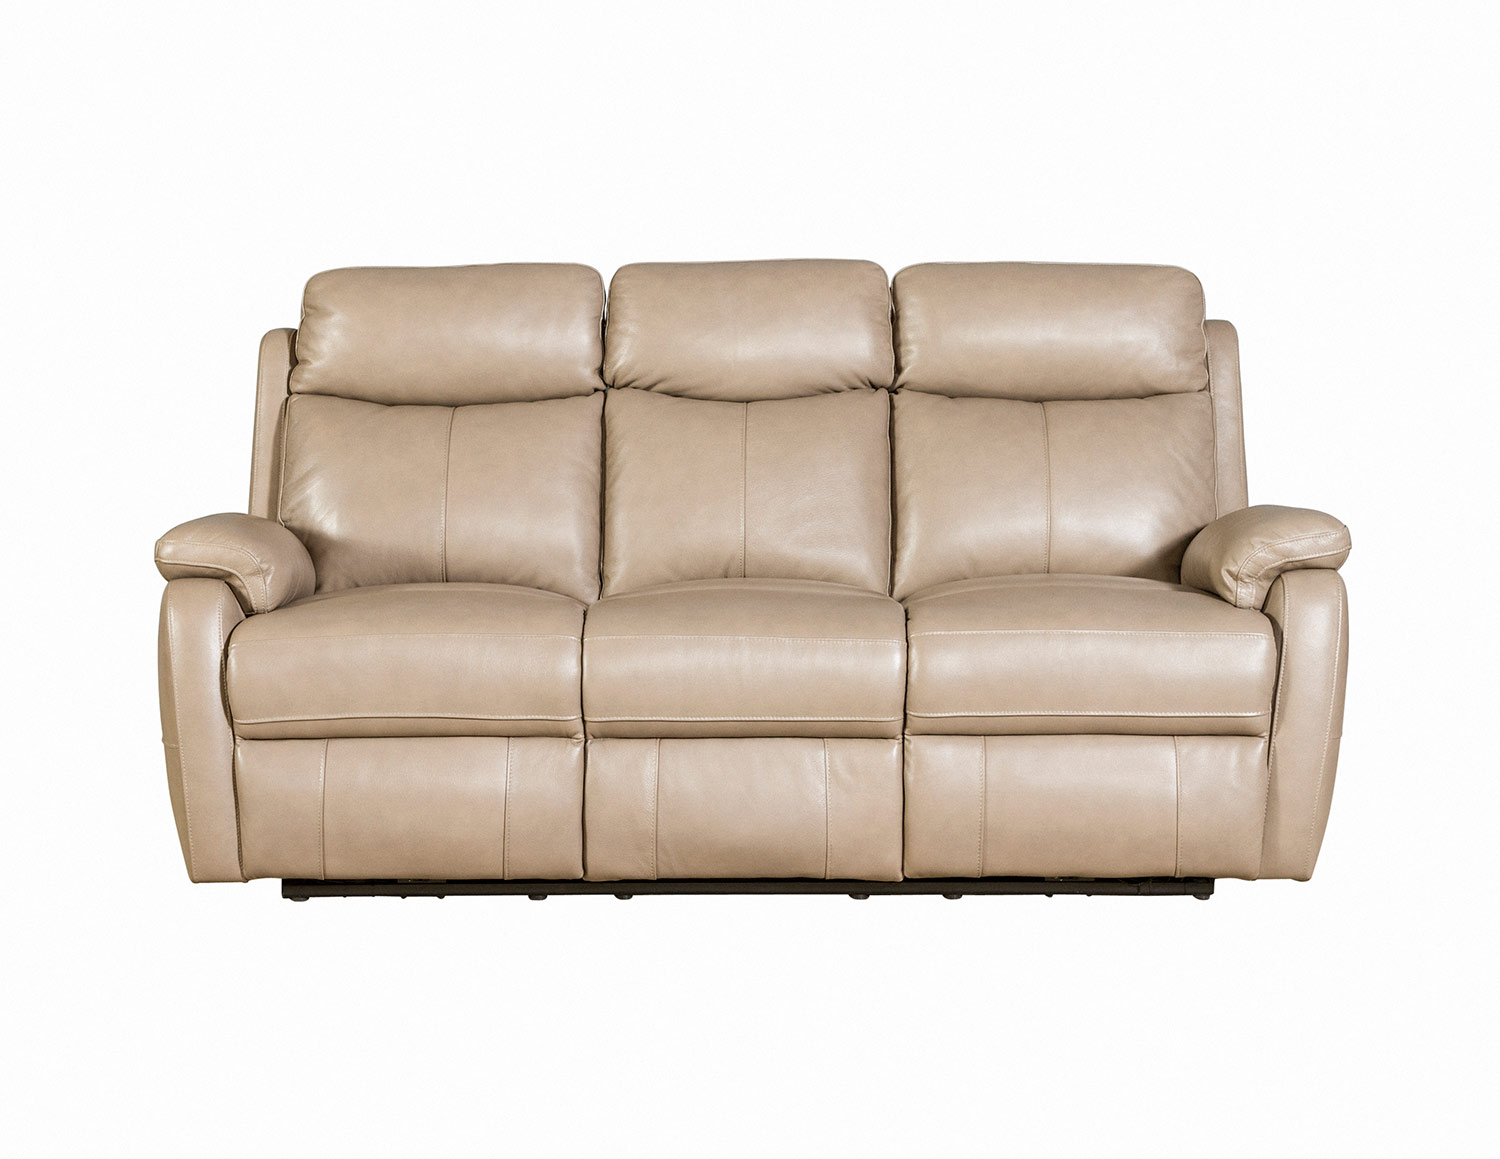 Barcalounger Brockton Power Reclining Sofa with Power Head Rests - Gable Twine/Leather Match